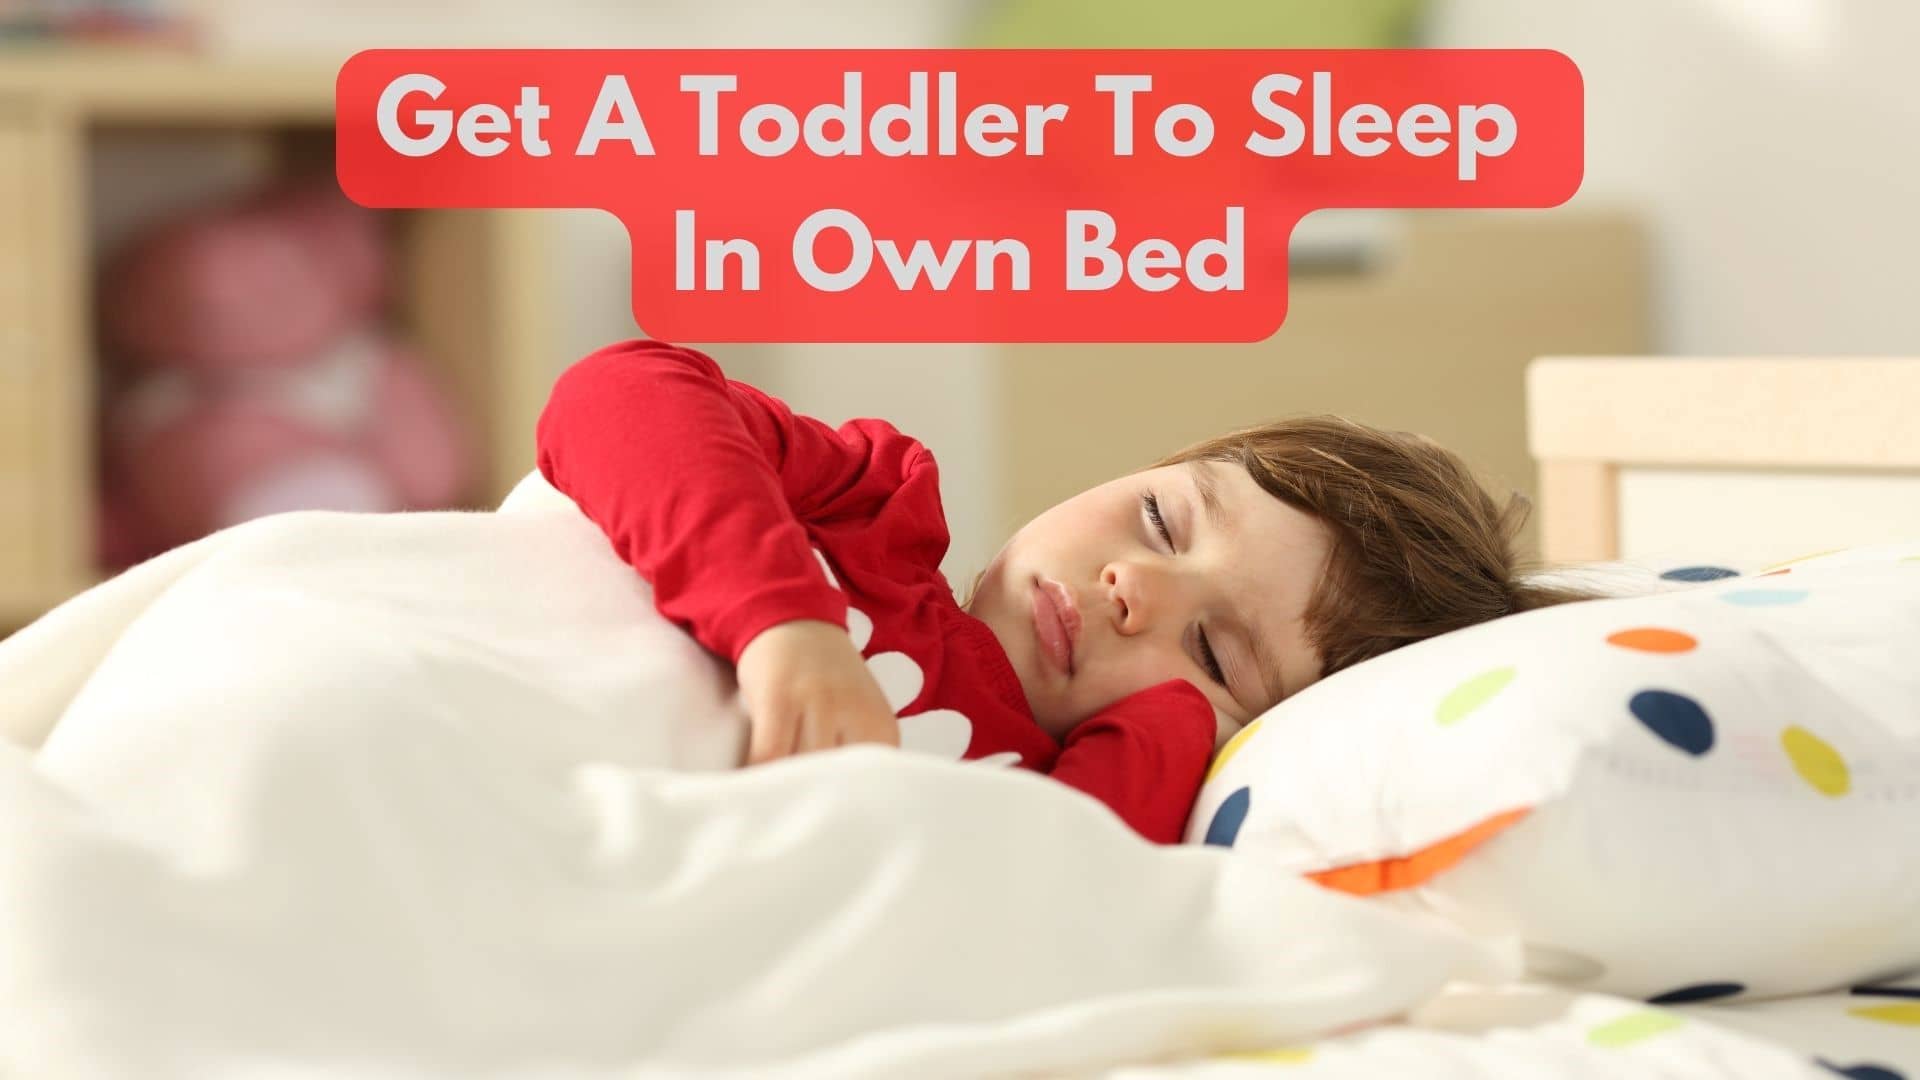 How To Get A Toddler To Sleep In Own Bed?